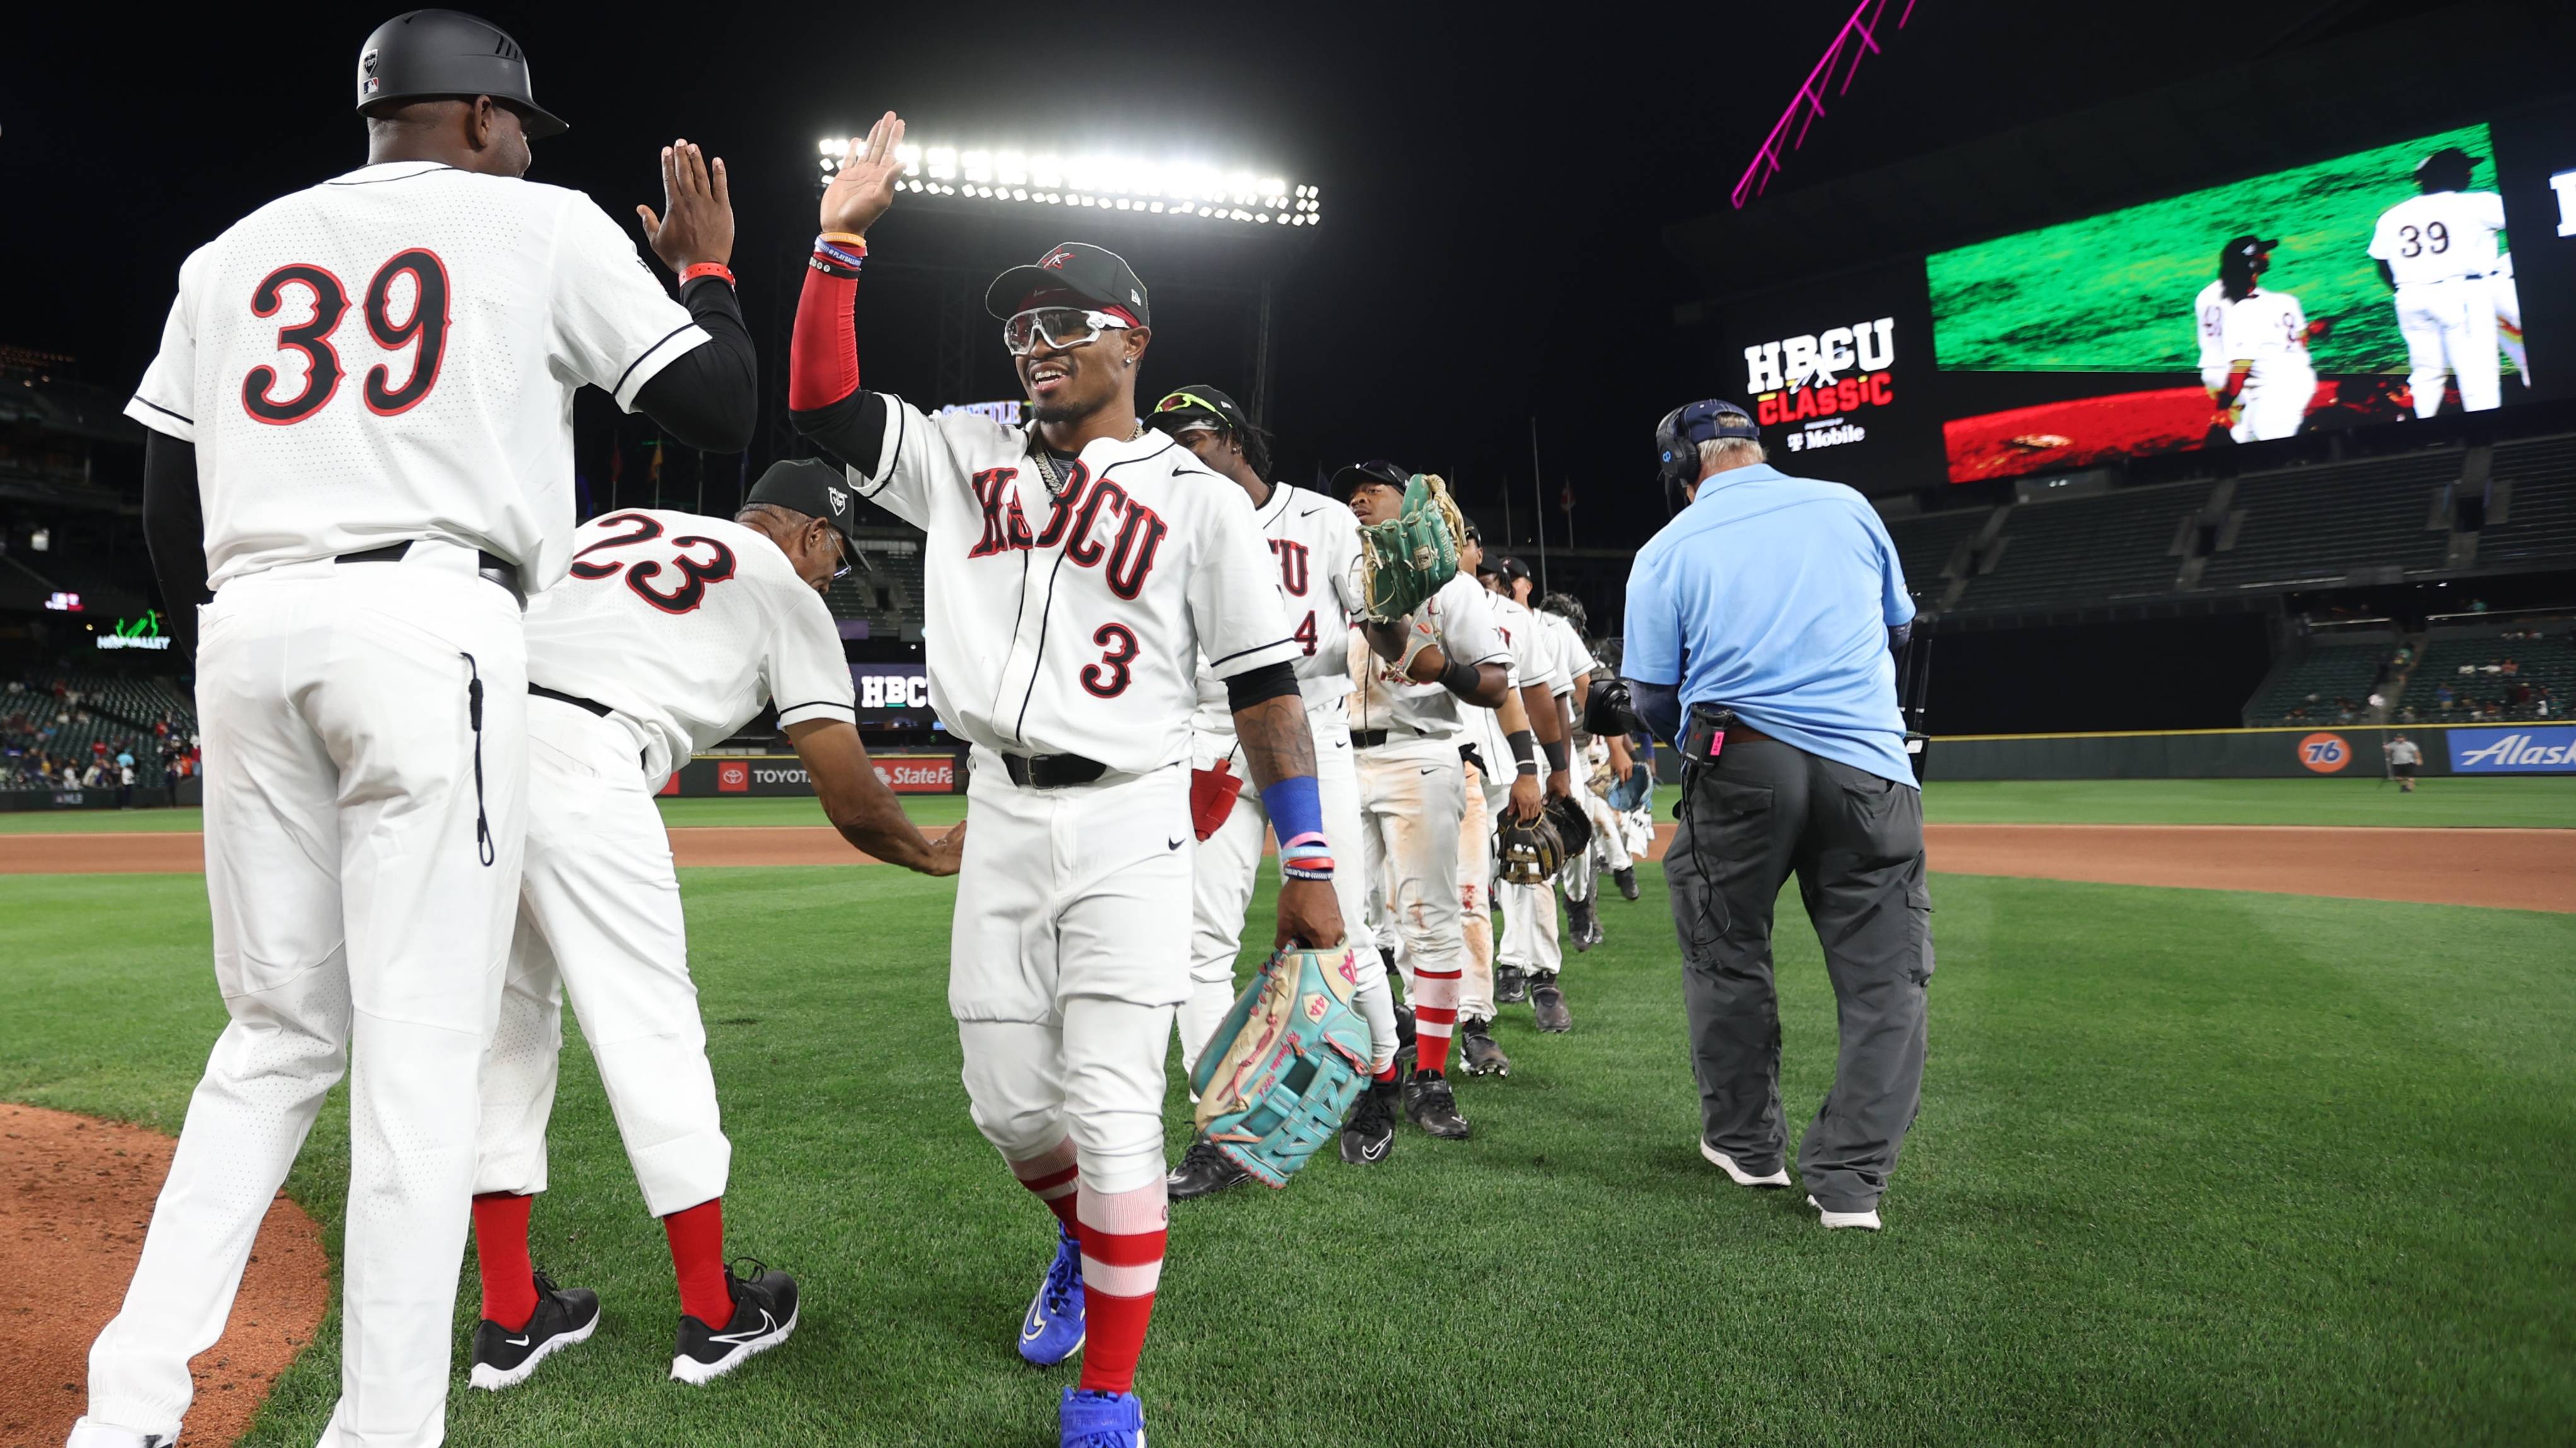 MLB stars spice up the diamond on Players Weekend